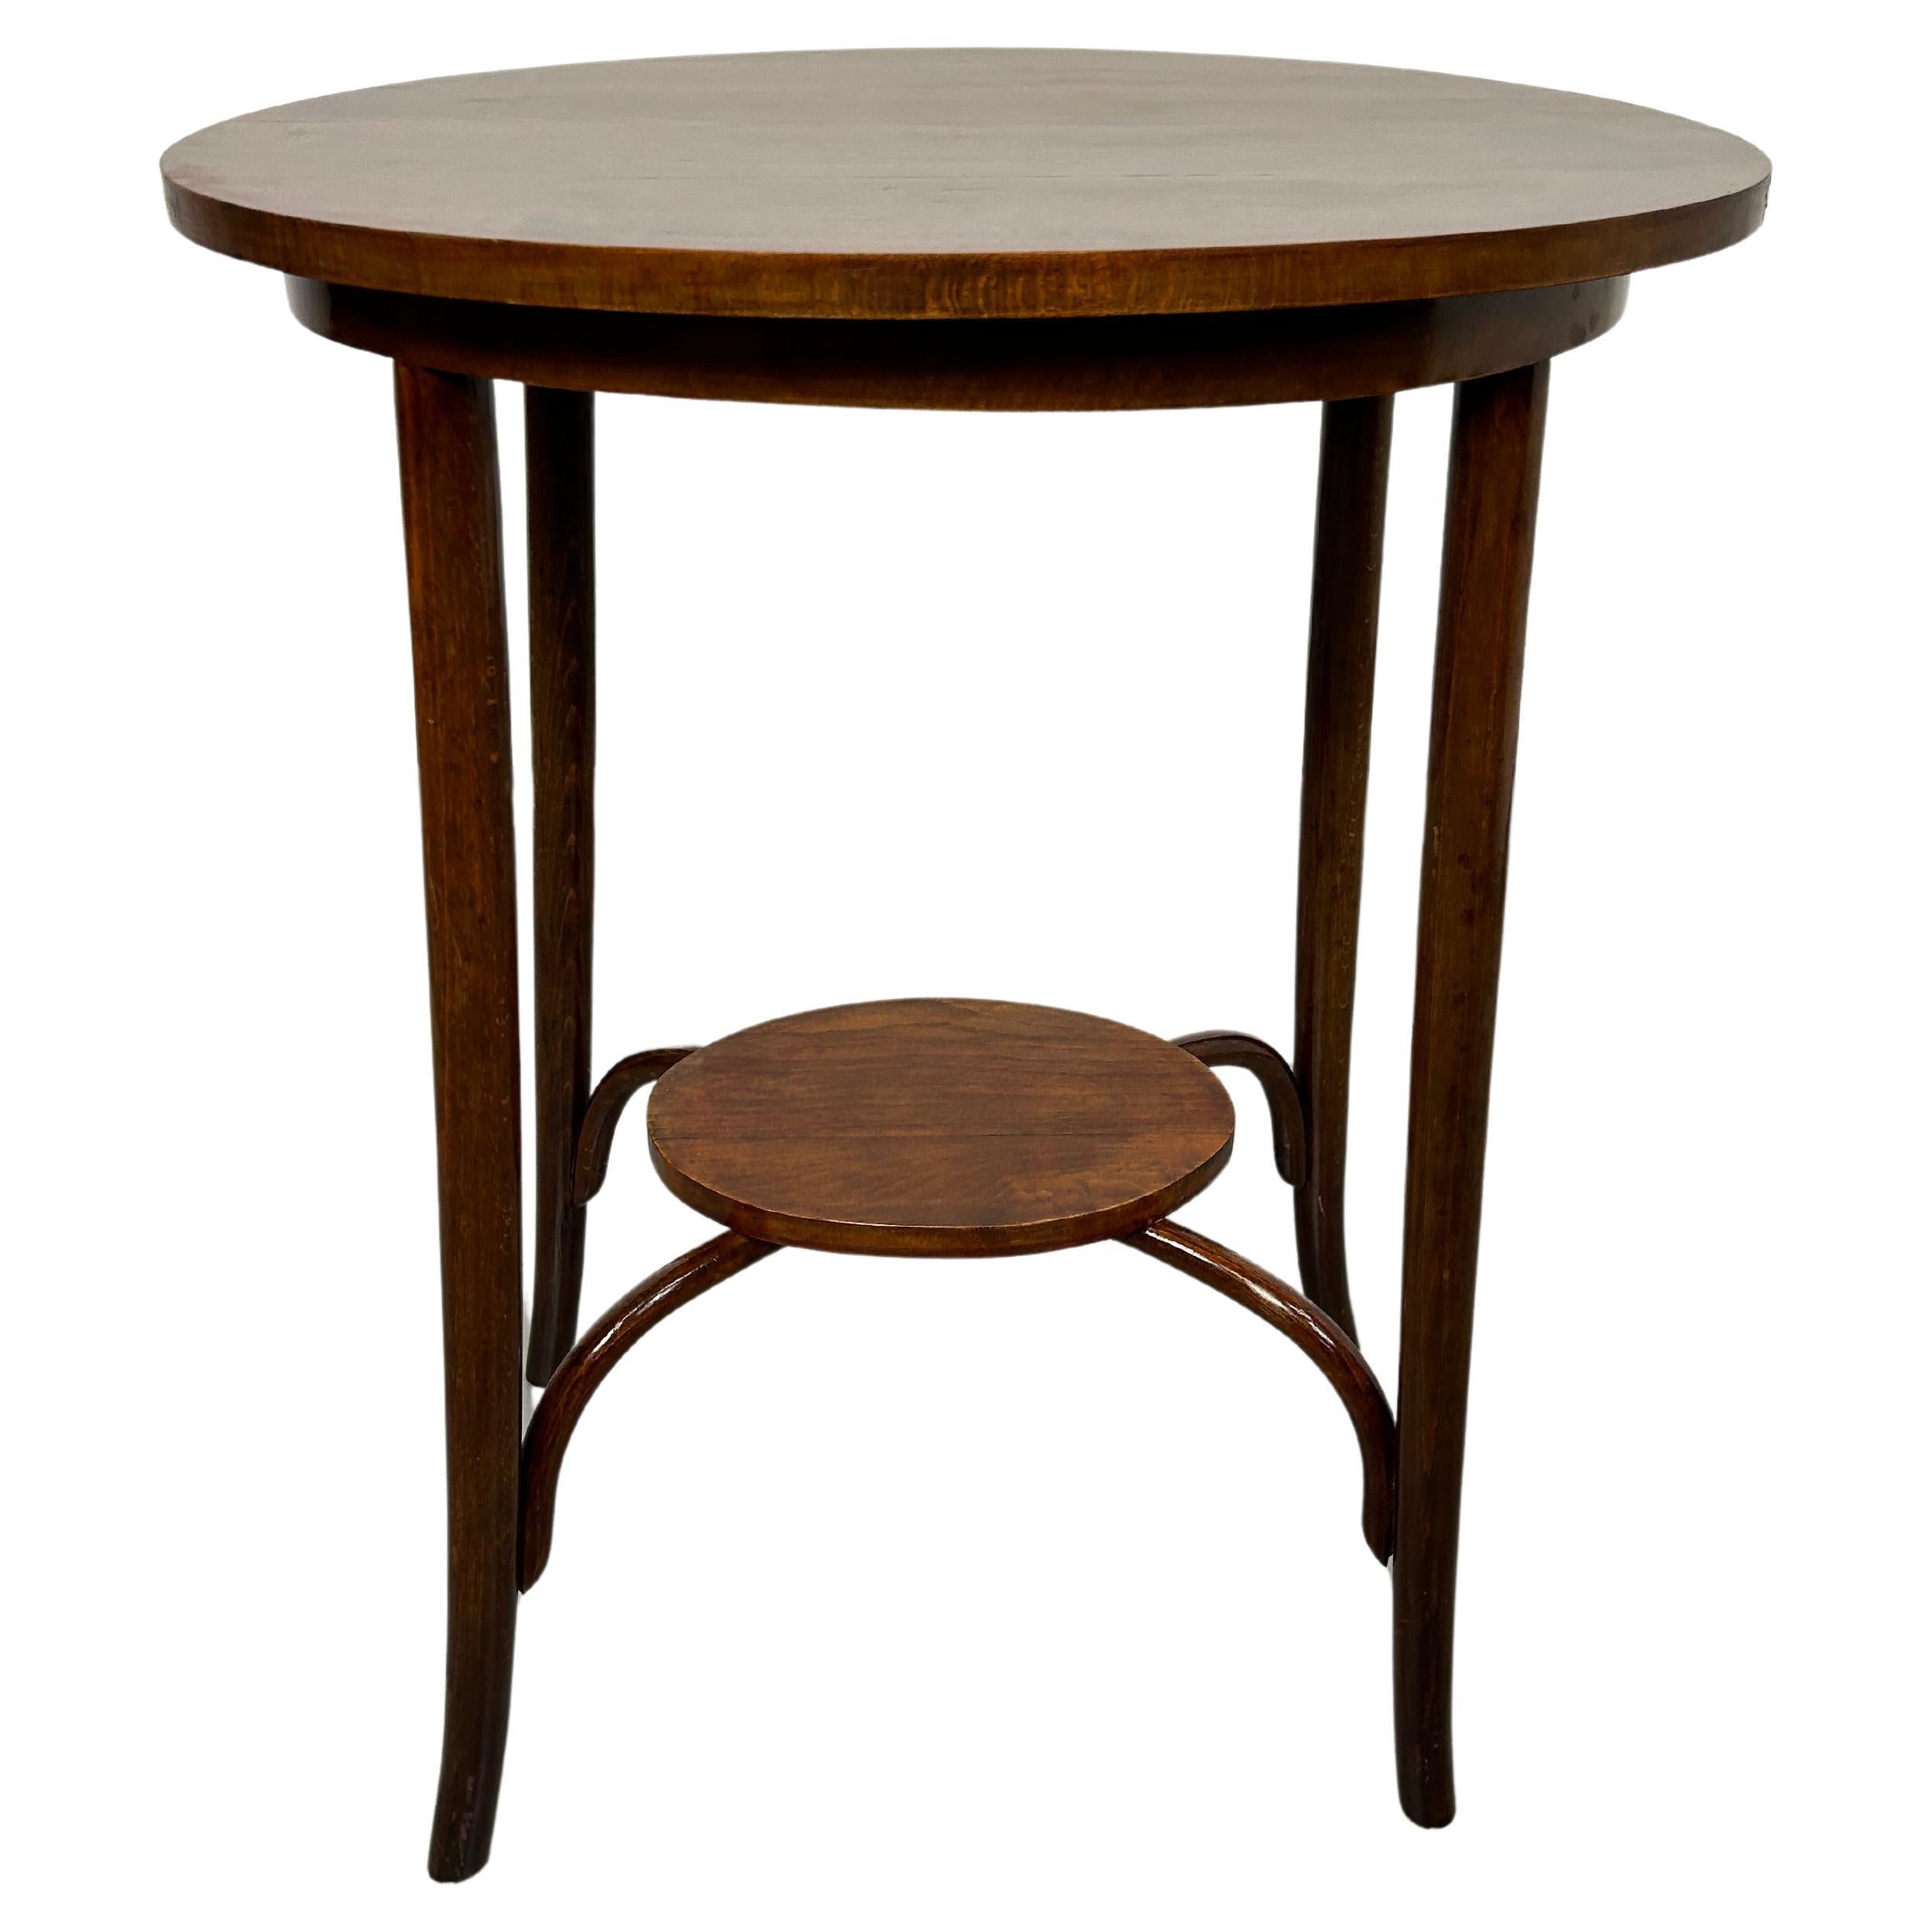 Oval bentwood table by Thonet For Sale